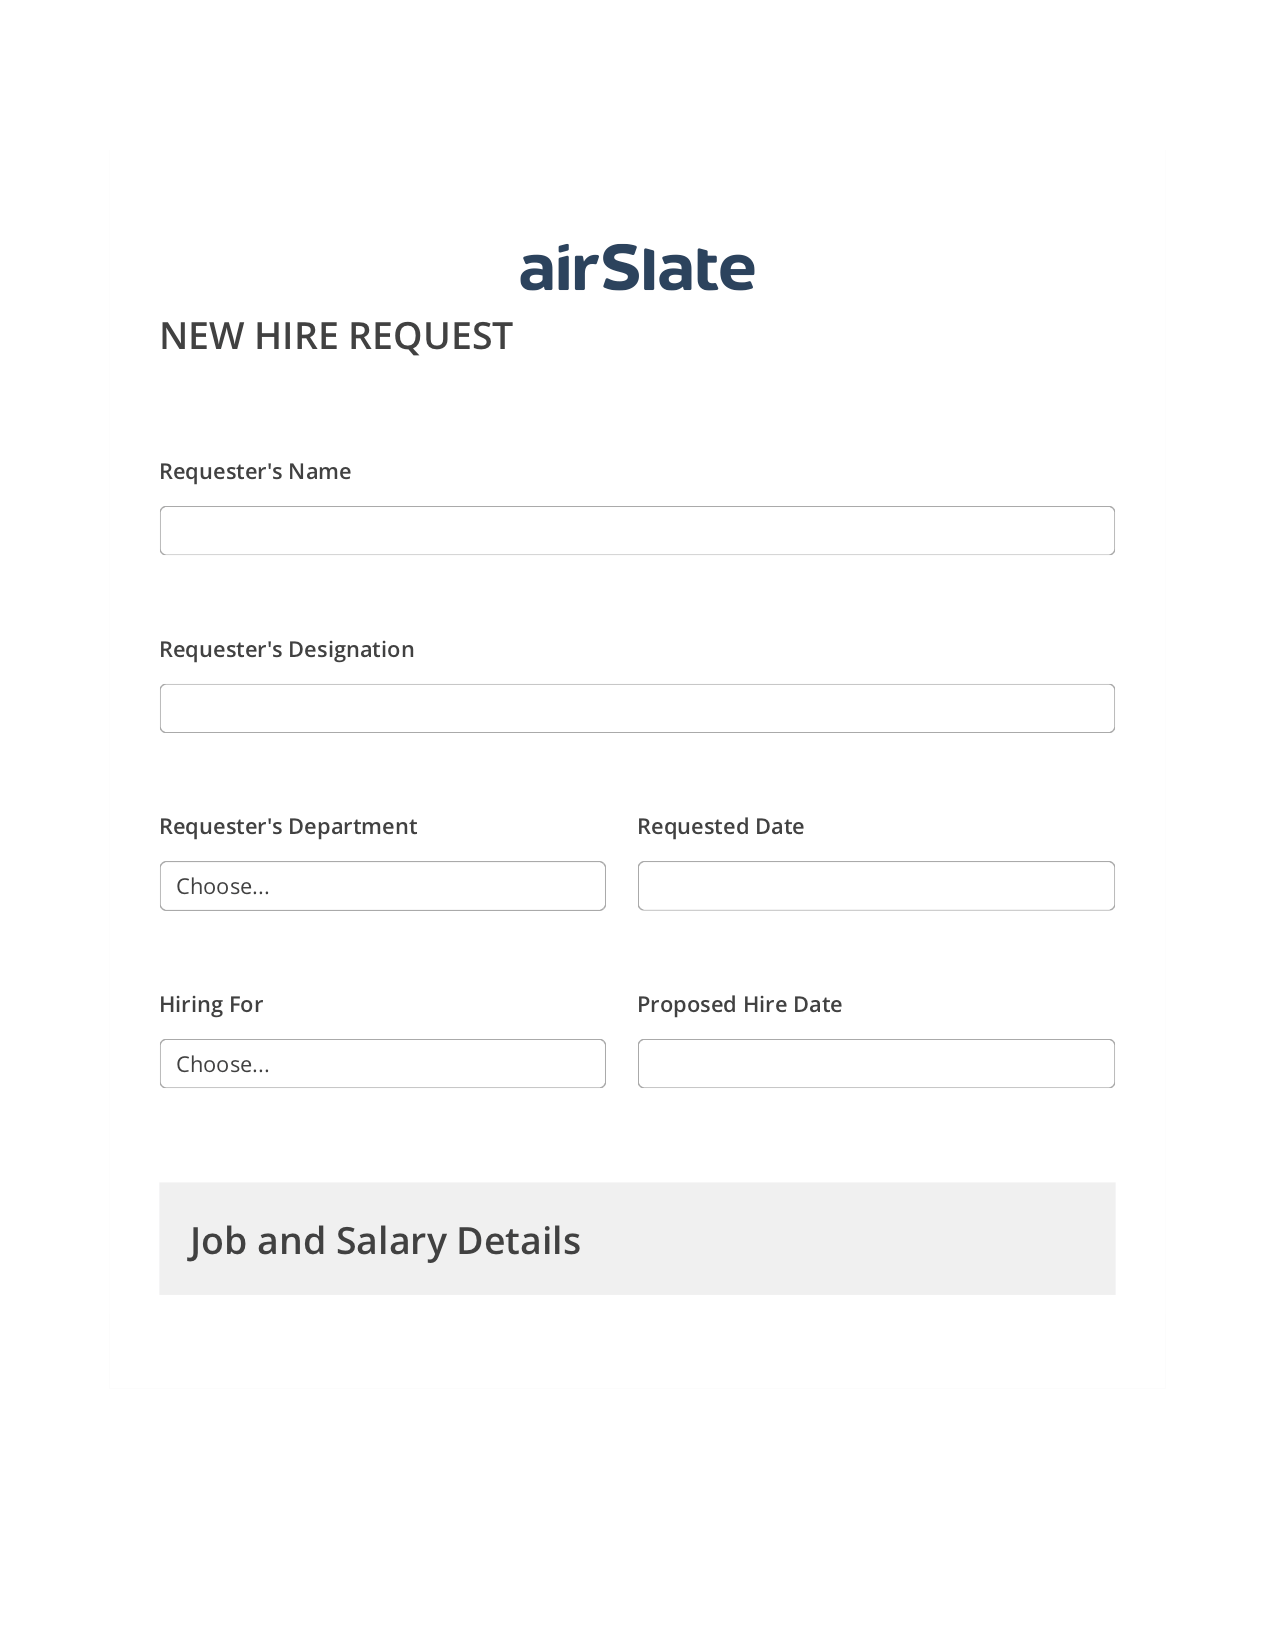 Multirole Hiring Request Workflow Pre-fill from Salesforce Records with SOQL Bot, Jira Bot, Archive to SharePoint Folder Bot